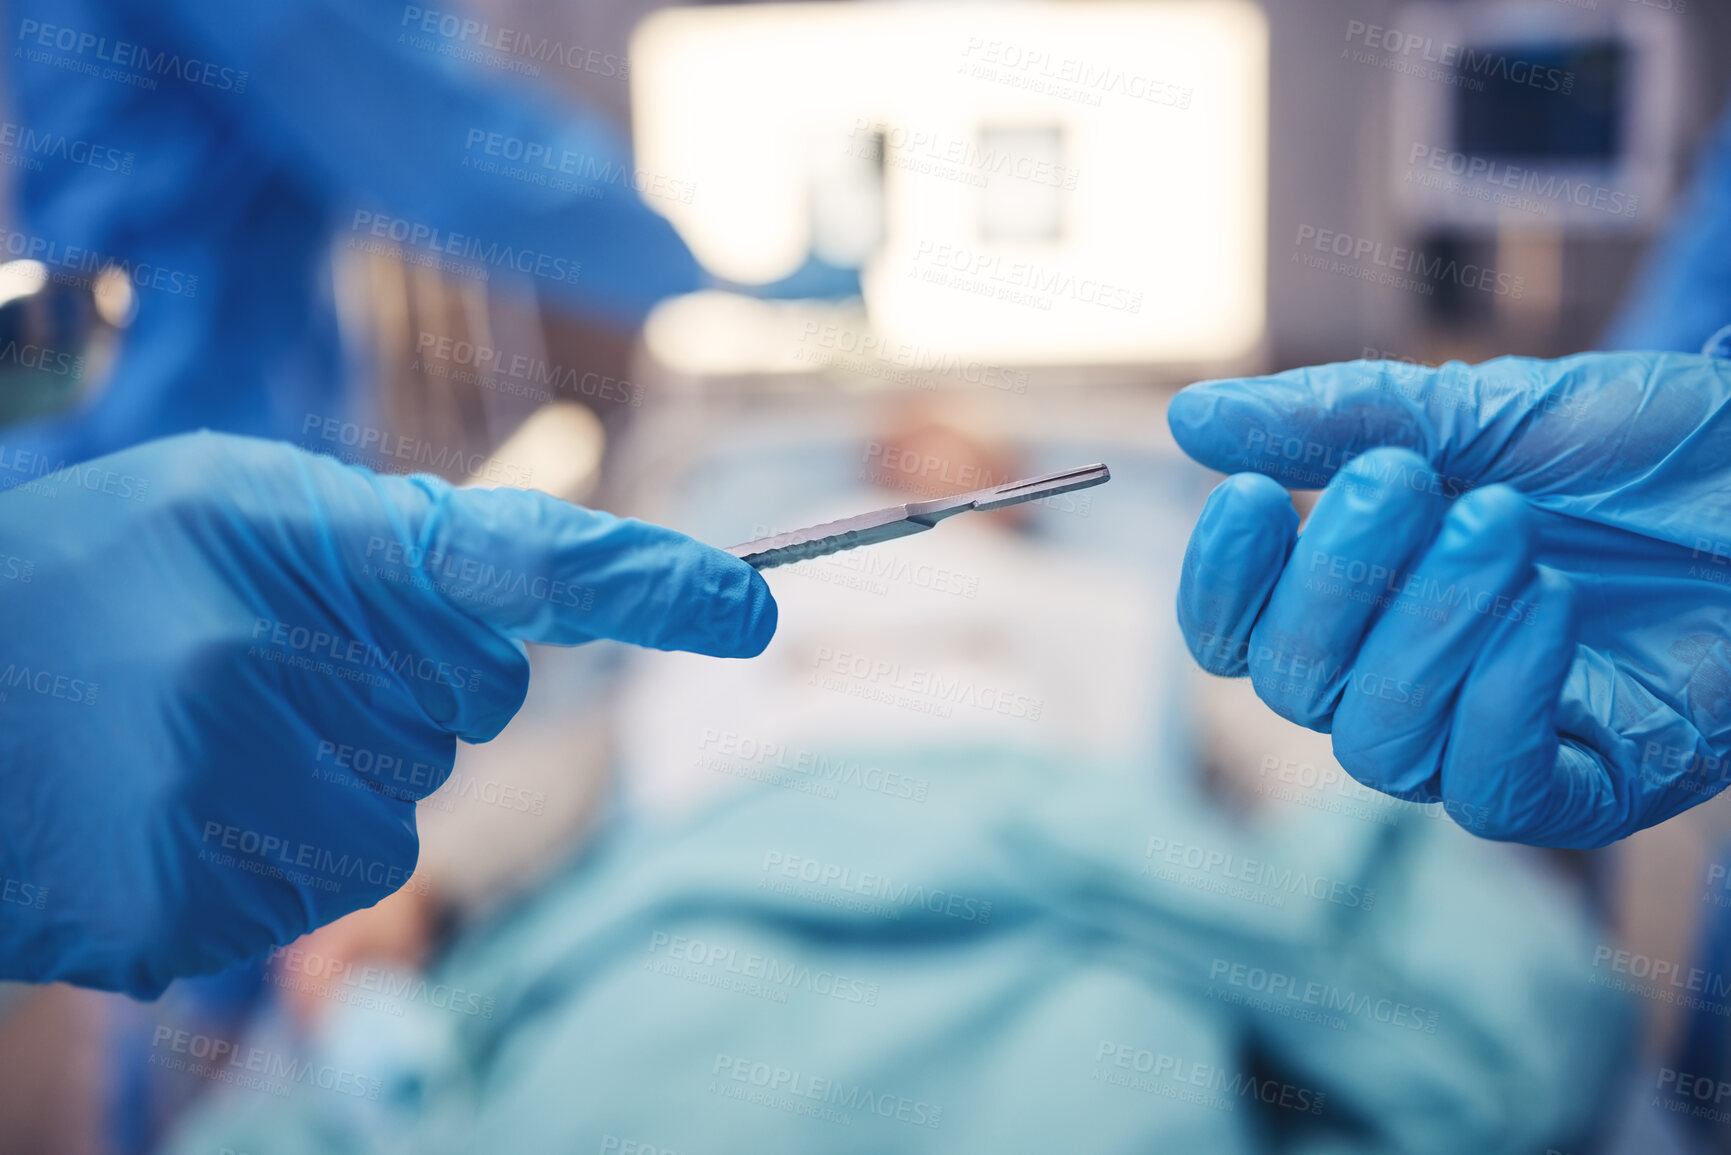 Buy stock photo Hands, scalpel for surgery and collaboration in a hospital during an operation or emergency medical procedure. Teamwork, healthcare equipment and doctors in theatre together to save a patient closeup